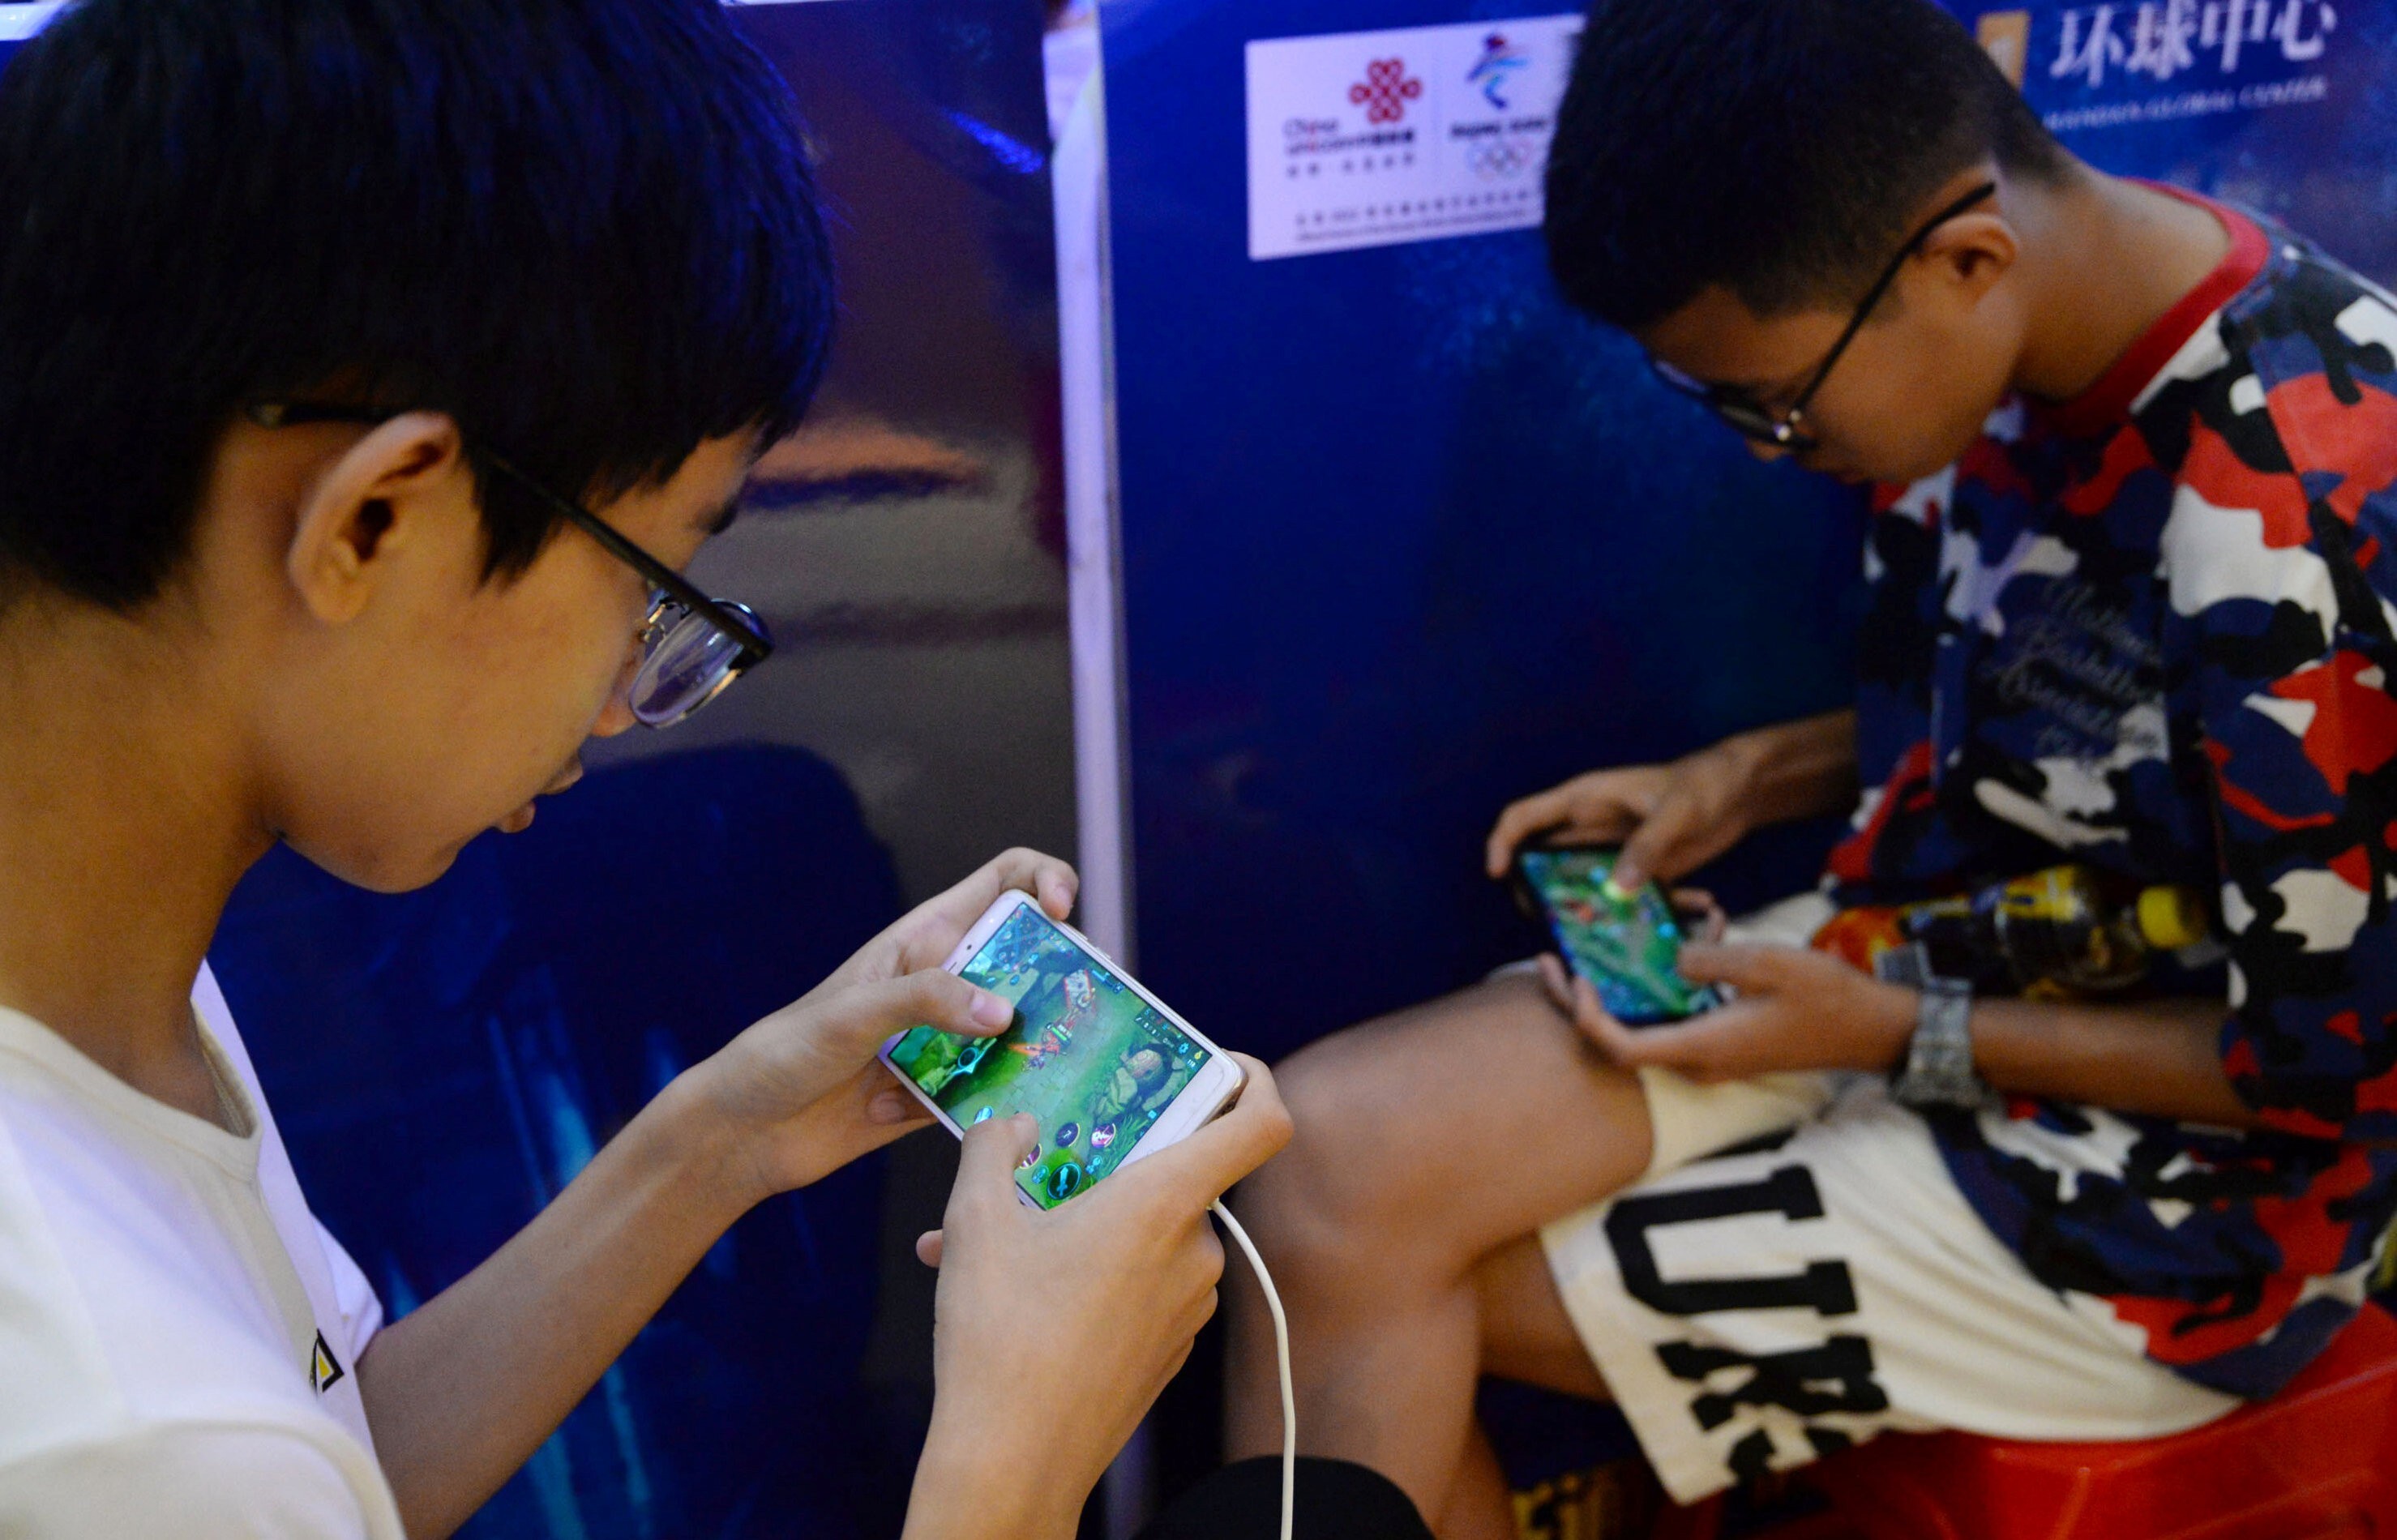 Young boys play the game Honour of Kings, developed by Tencent, during an event inside a shopping centre in Handan, Hebei province, on August 5, 2018. Photo: Reuters